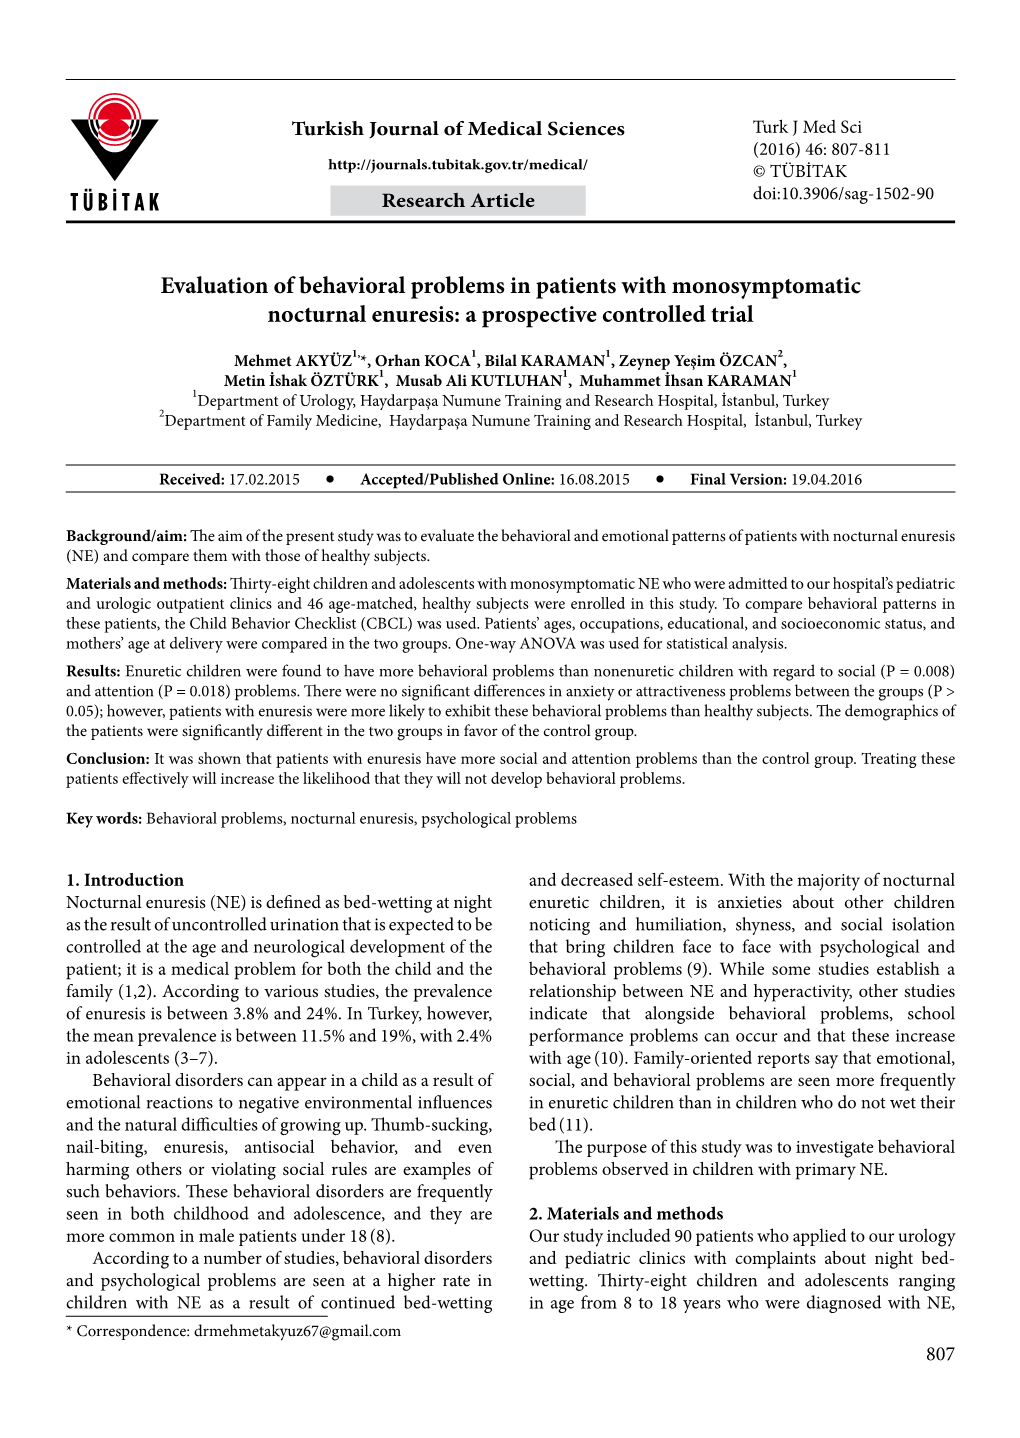 Evaluation of Behavioral Problems in Patients with Monosymptomatic Nocturnal Enuresis: a Prospective Controlled Trial